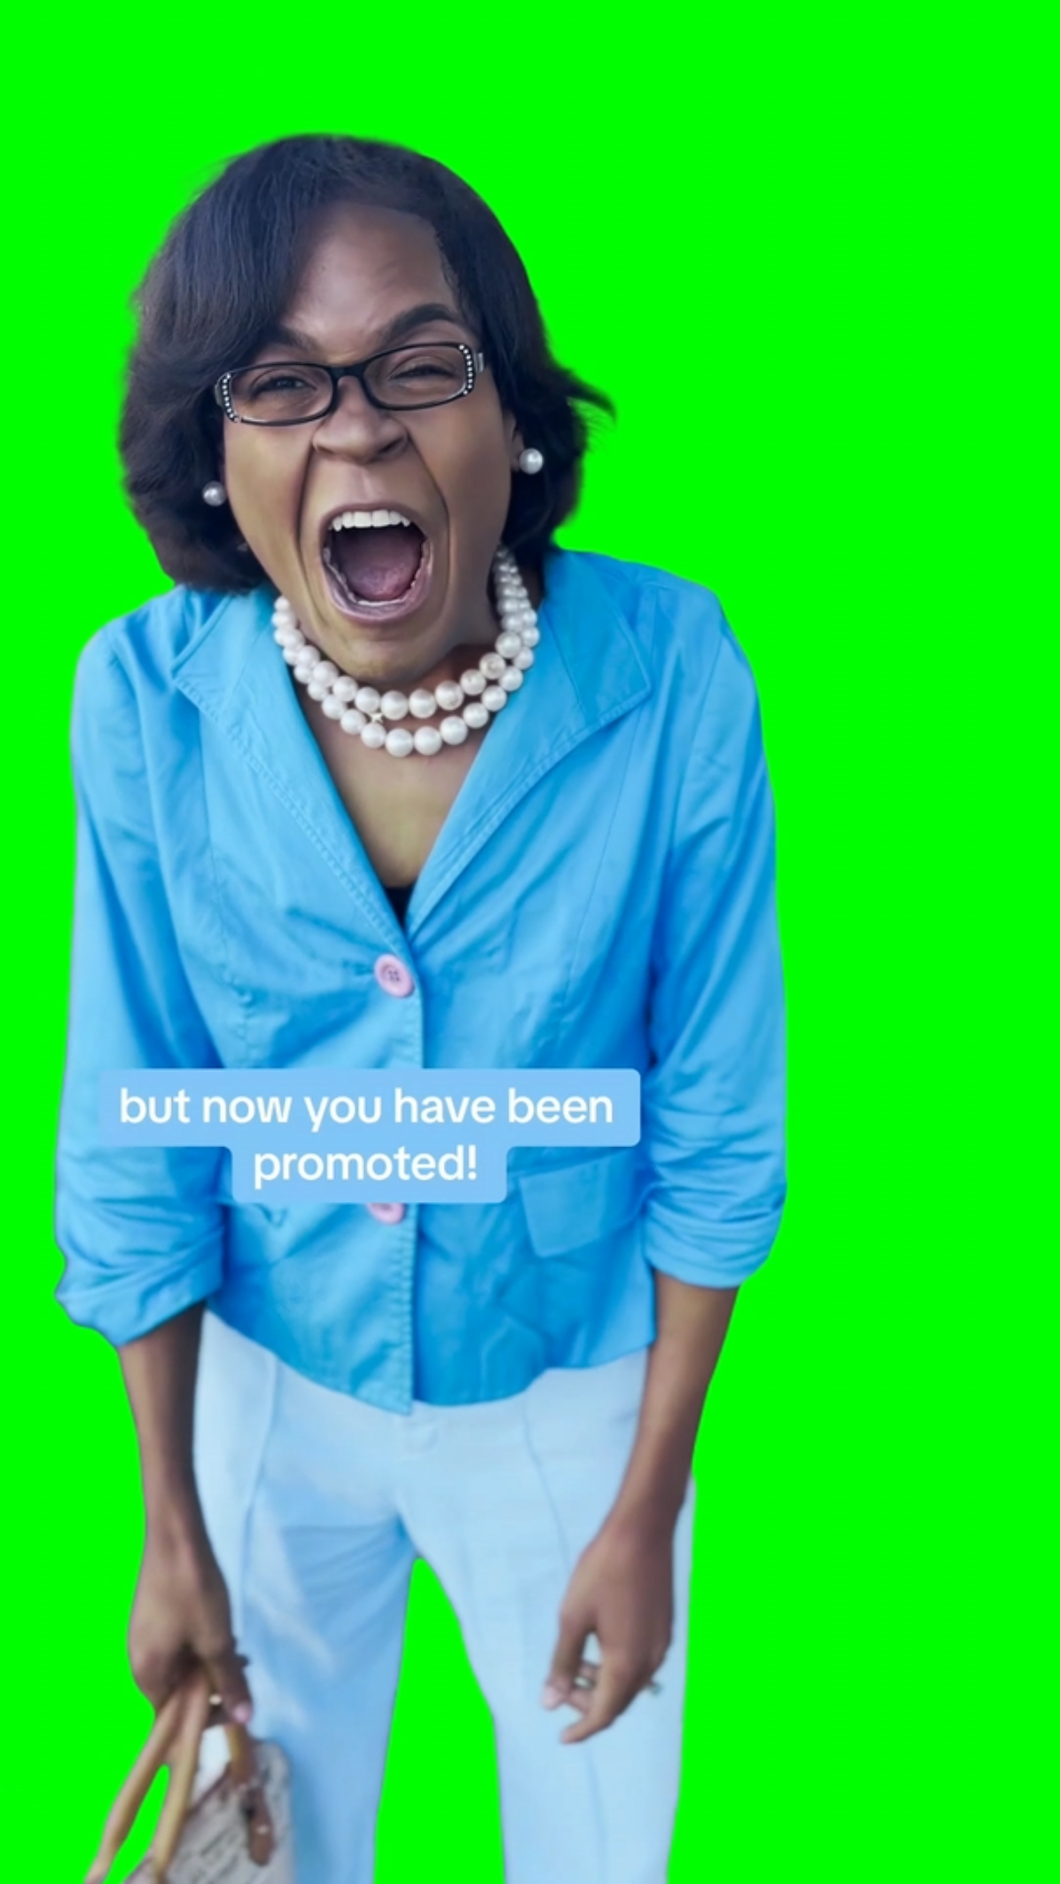 You have been promoted! You are now one of my elite employees! TikTok meme (Green Screen)